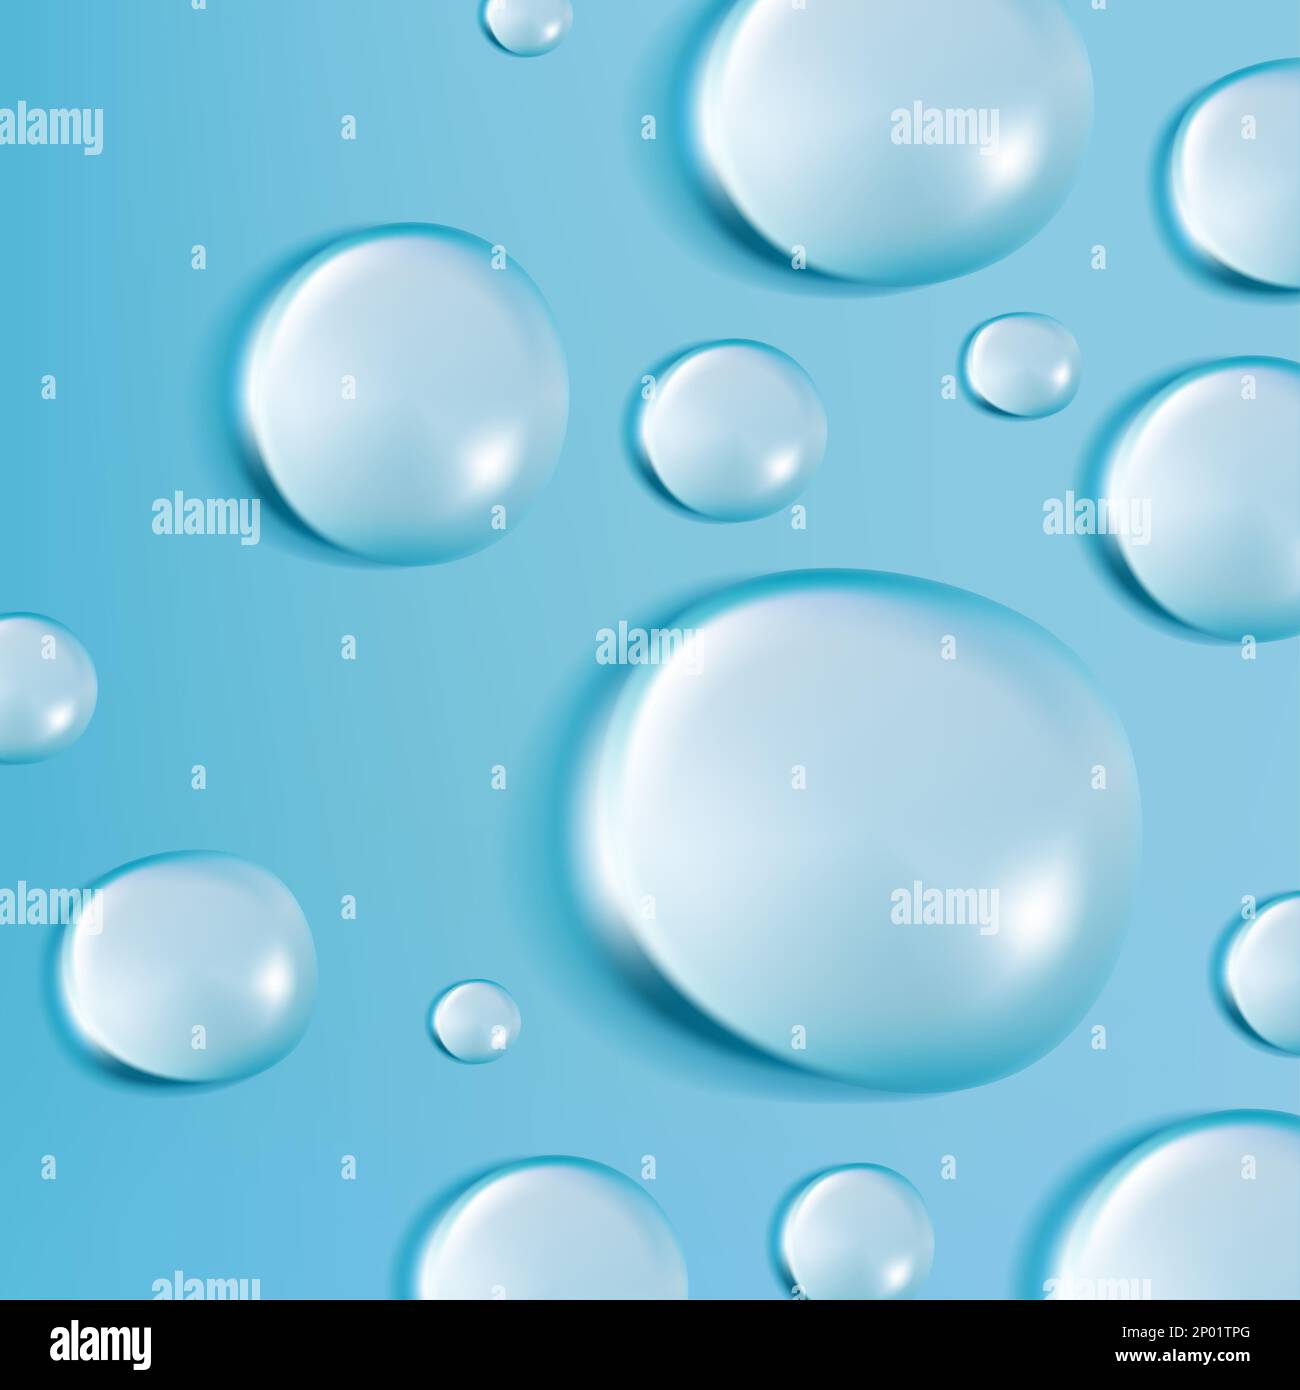 Vector Realistic Water Drops Illustration for Poster, Book Cover or ...